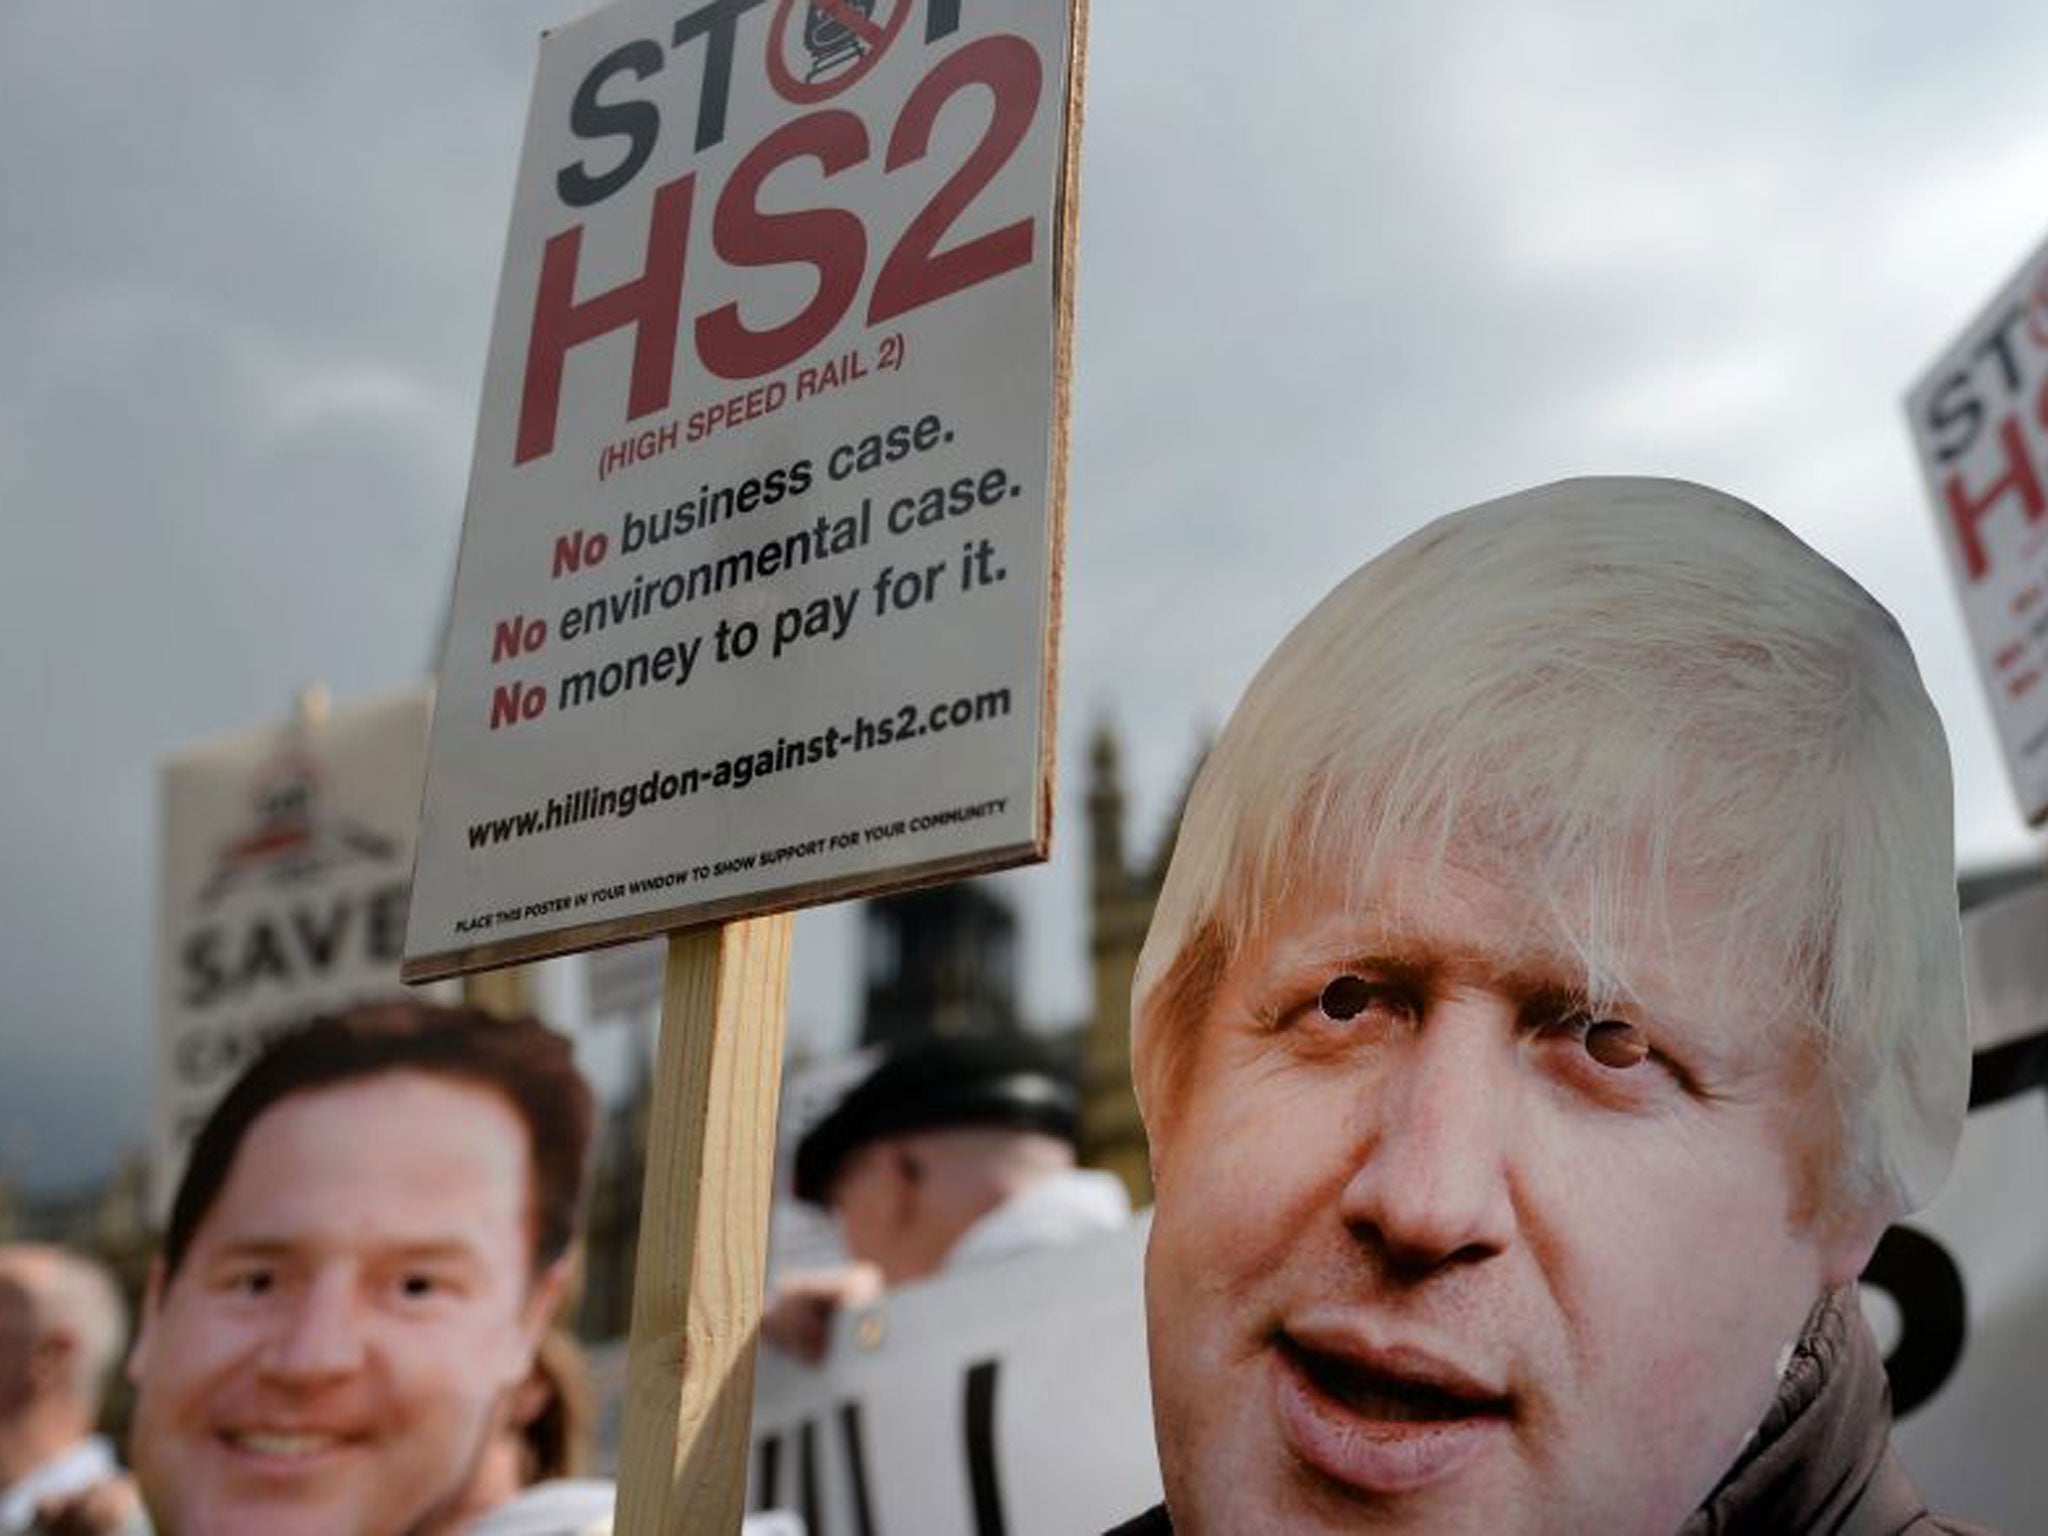 Stop HS2 campaigners, some wearing masks of London Mayor Boris Johnson, were protesting outside parliament